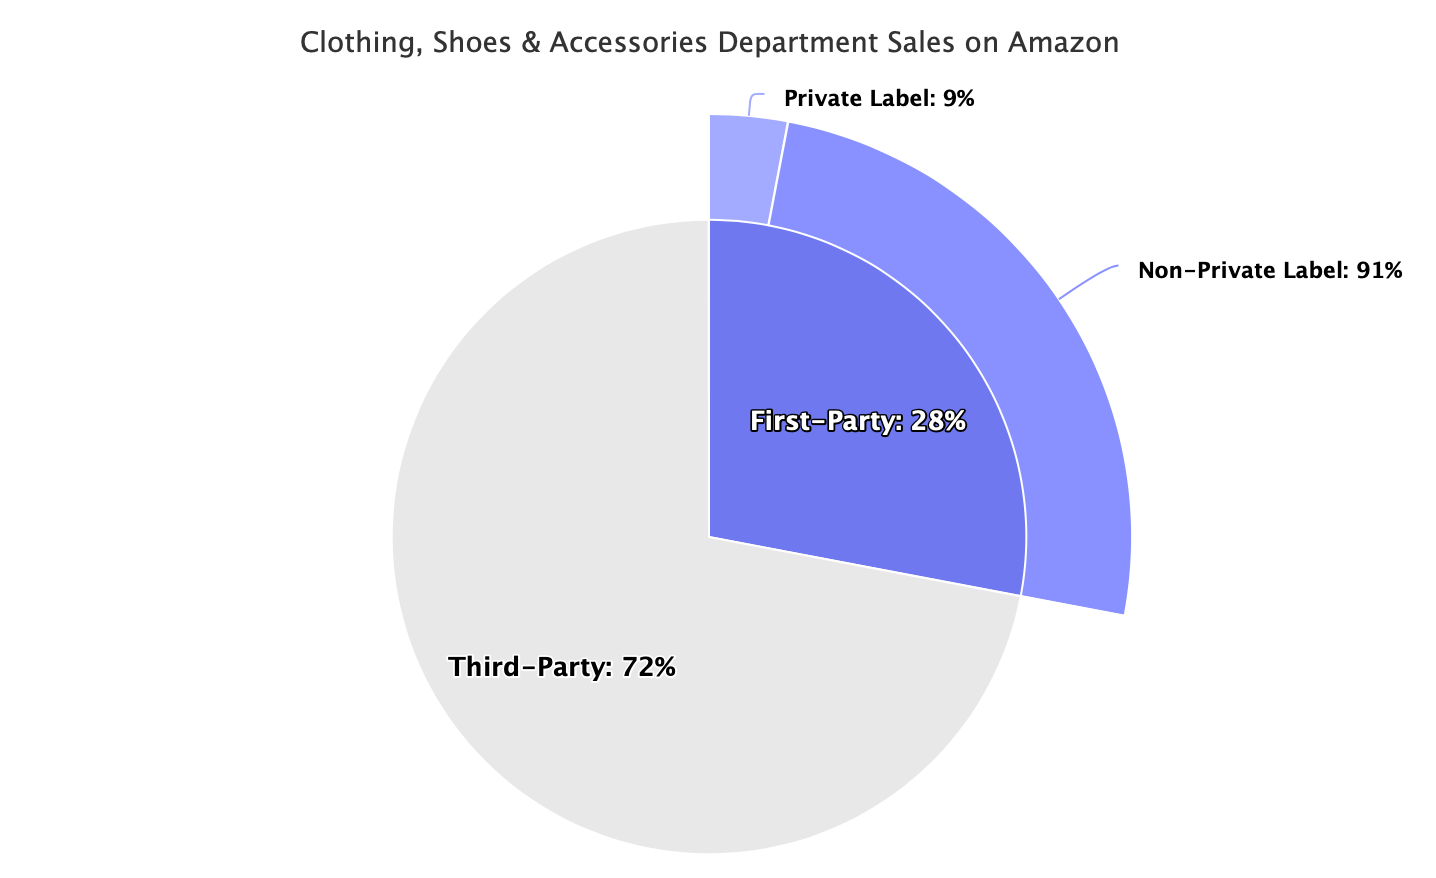 Clothing, Shoes & Accessories Department Sales on Amazon